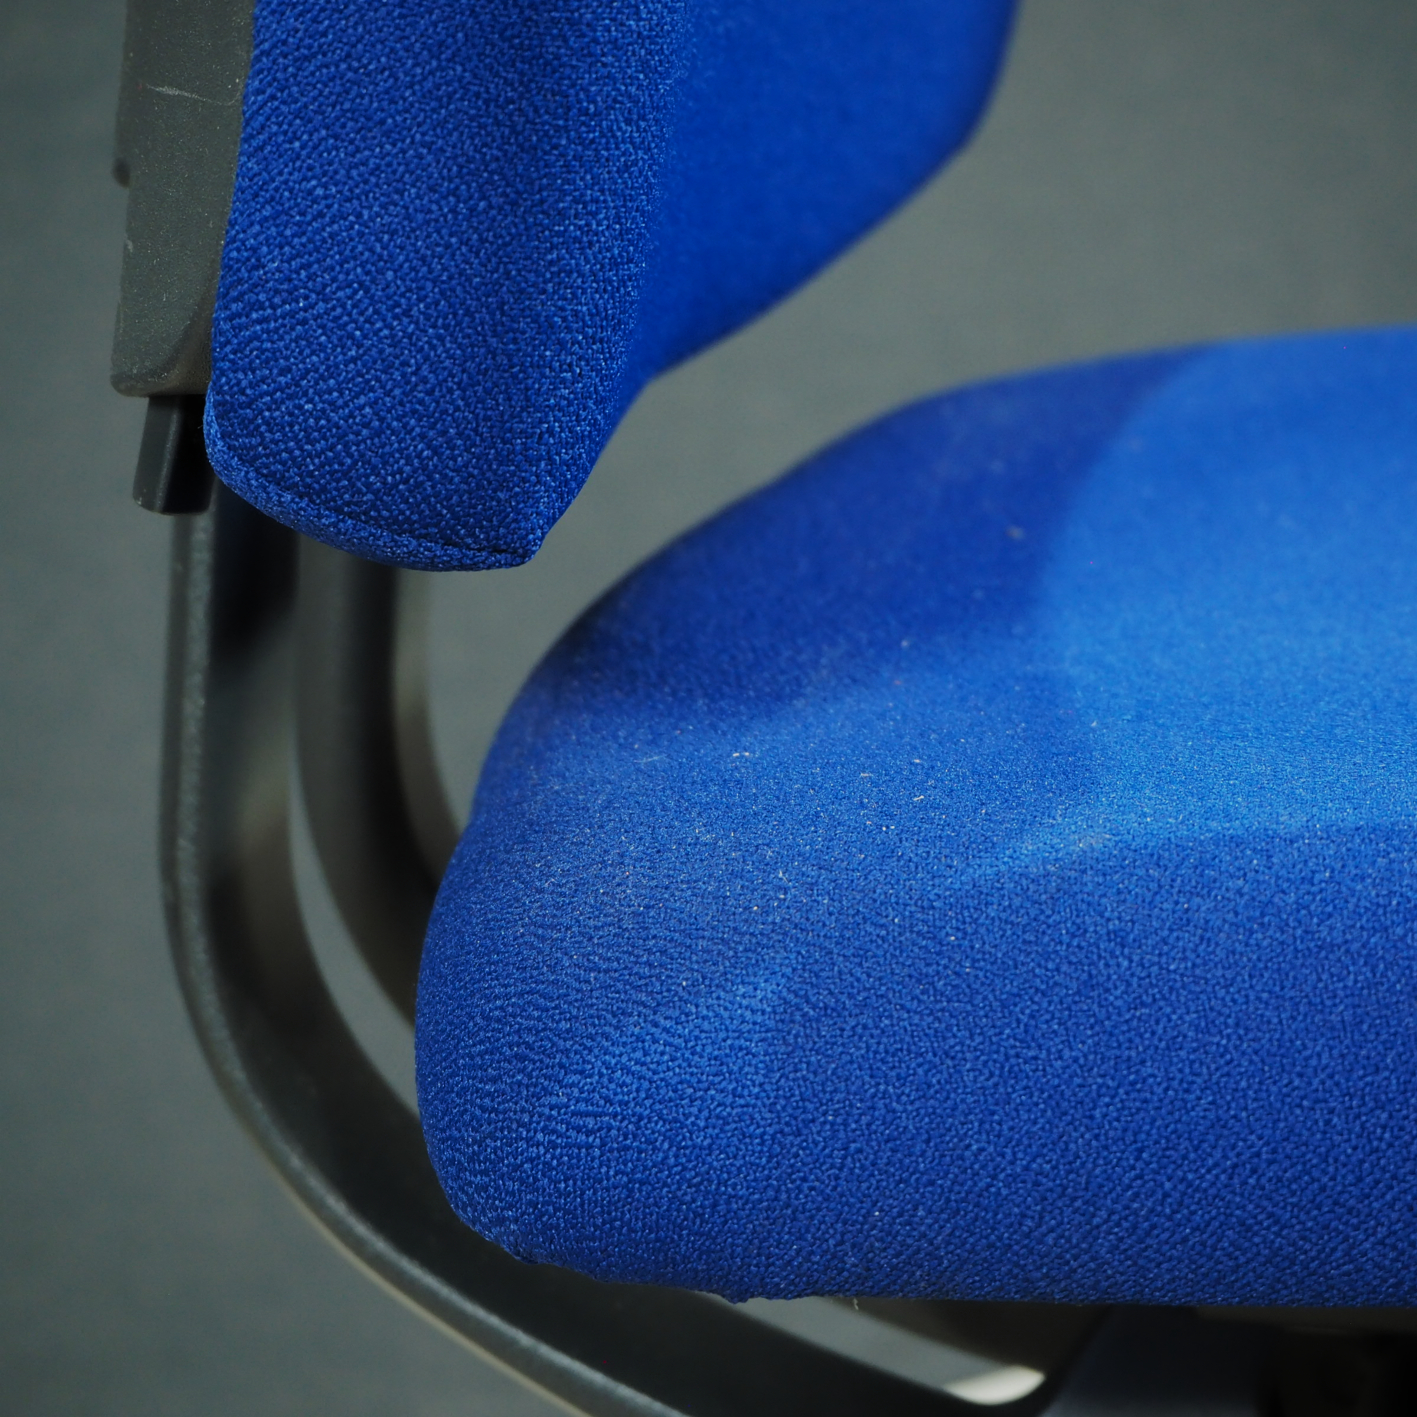 Electric blue office chair by Drabert